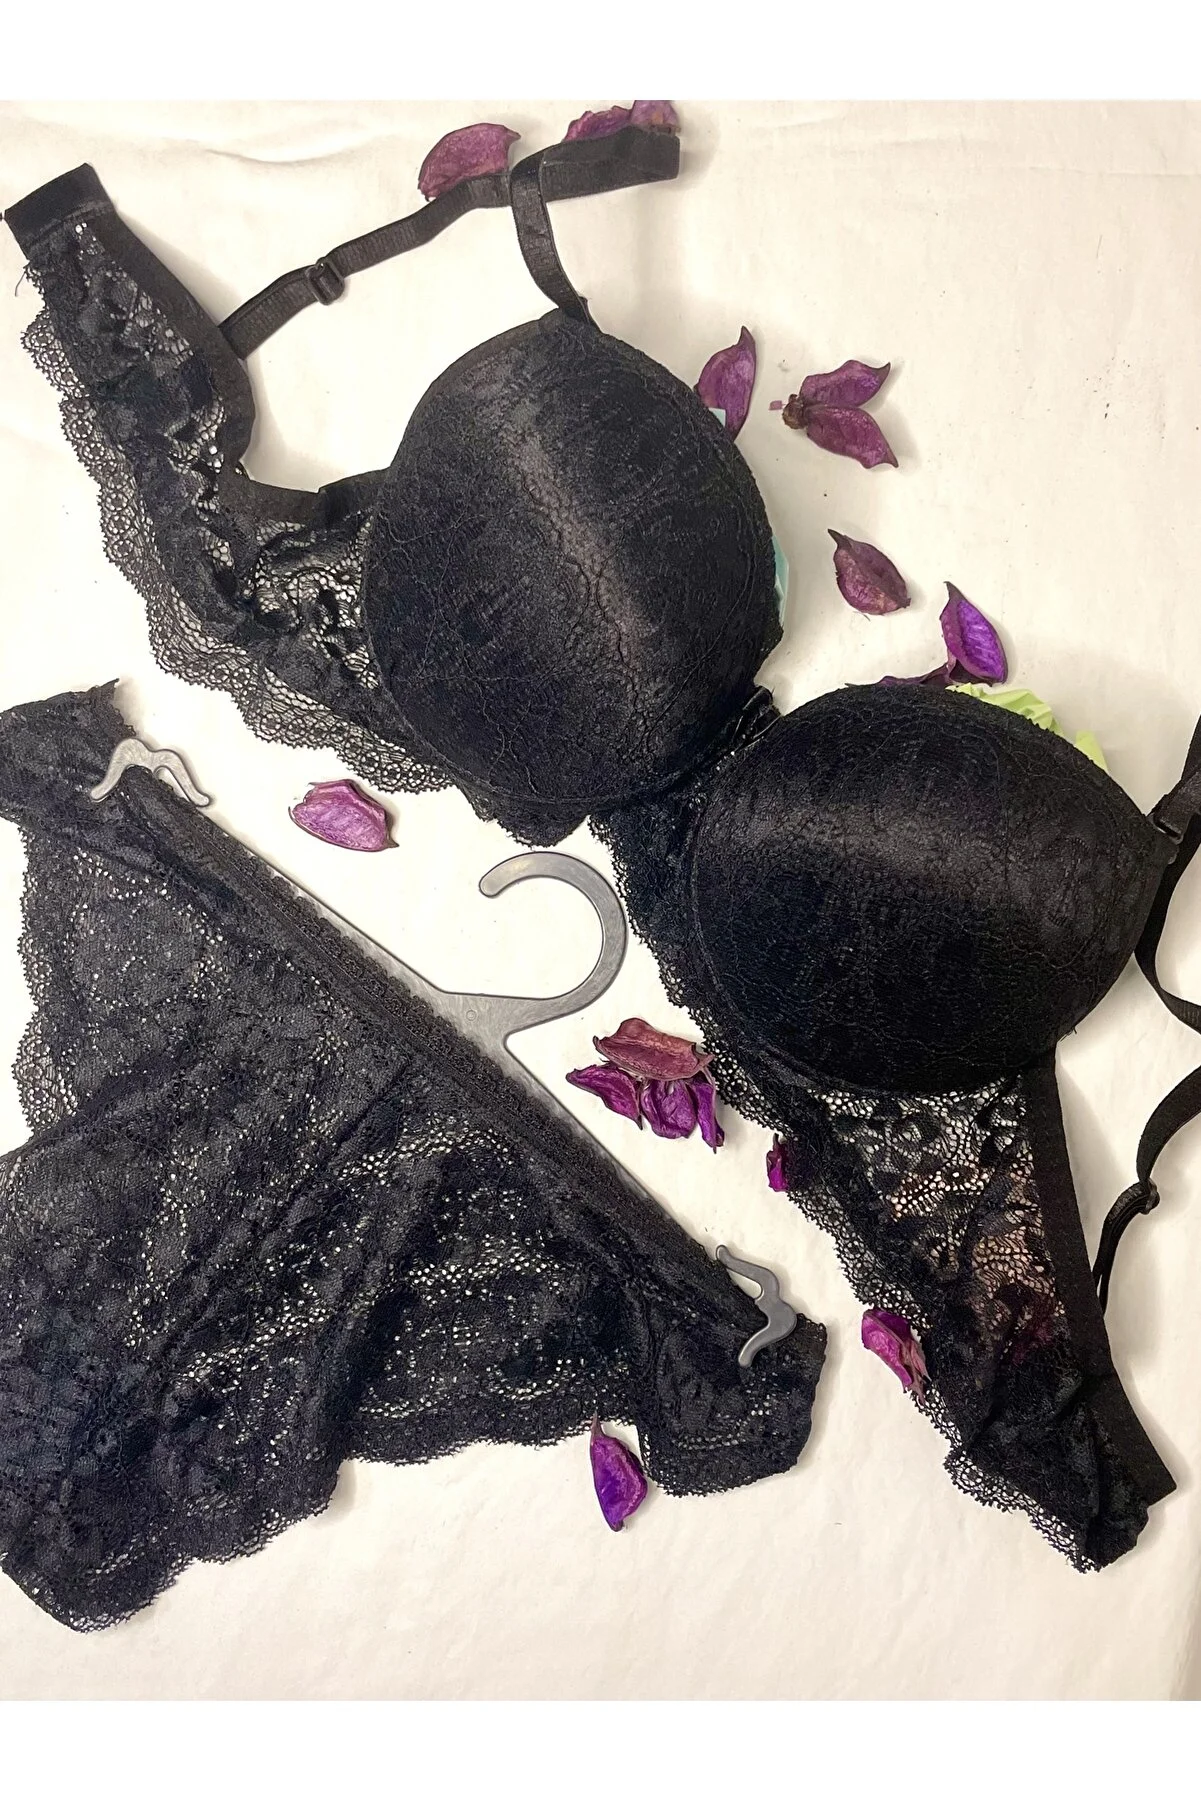 How to Tastefully Show Off Your Little Lacy Bra